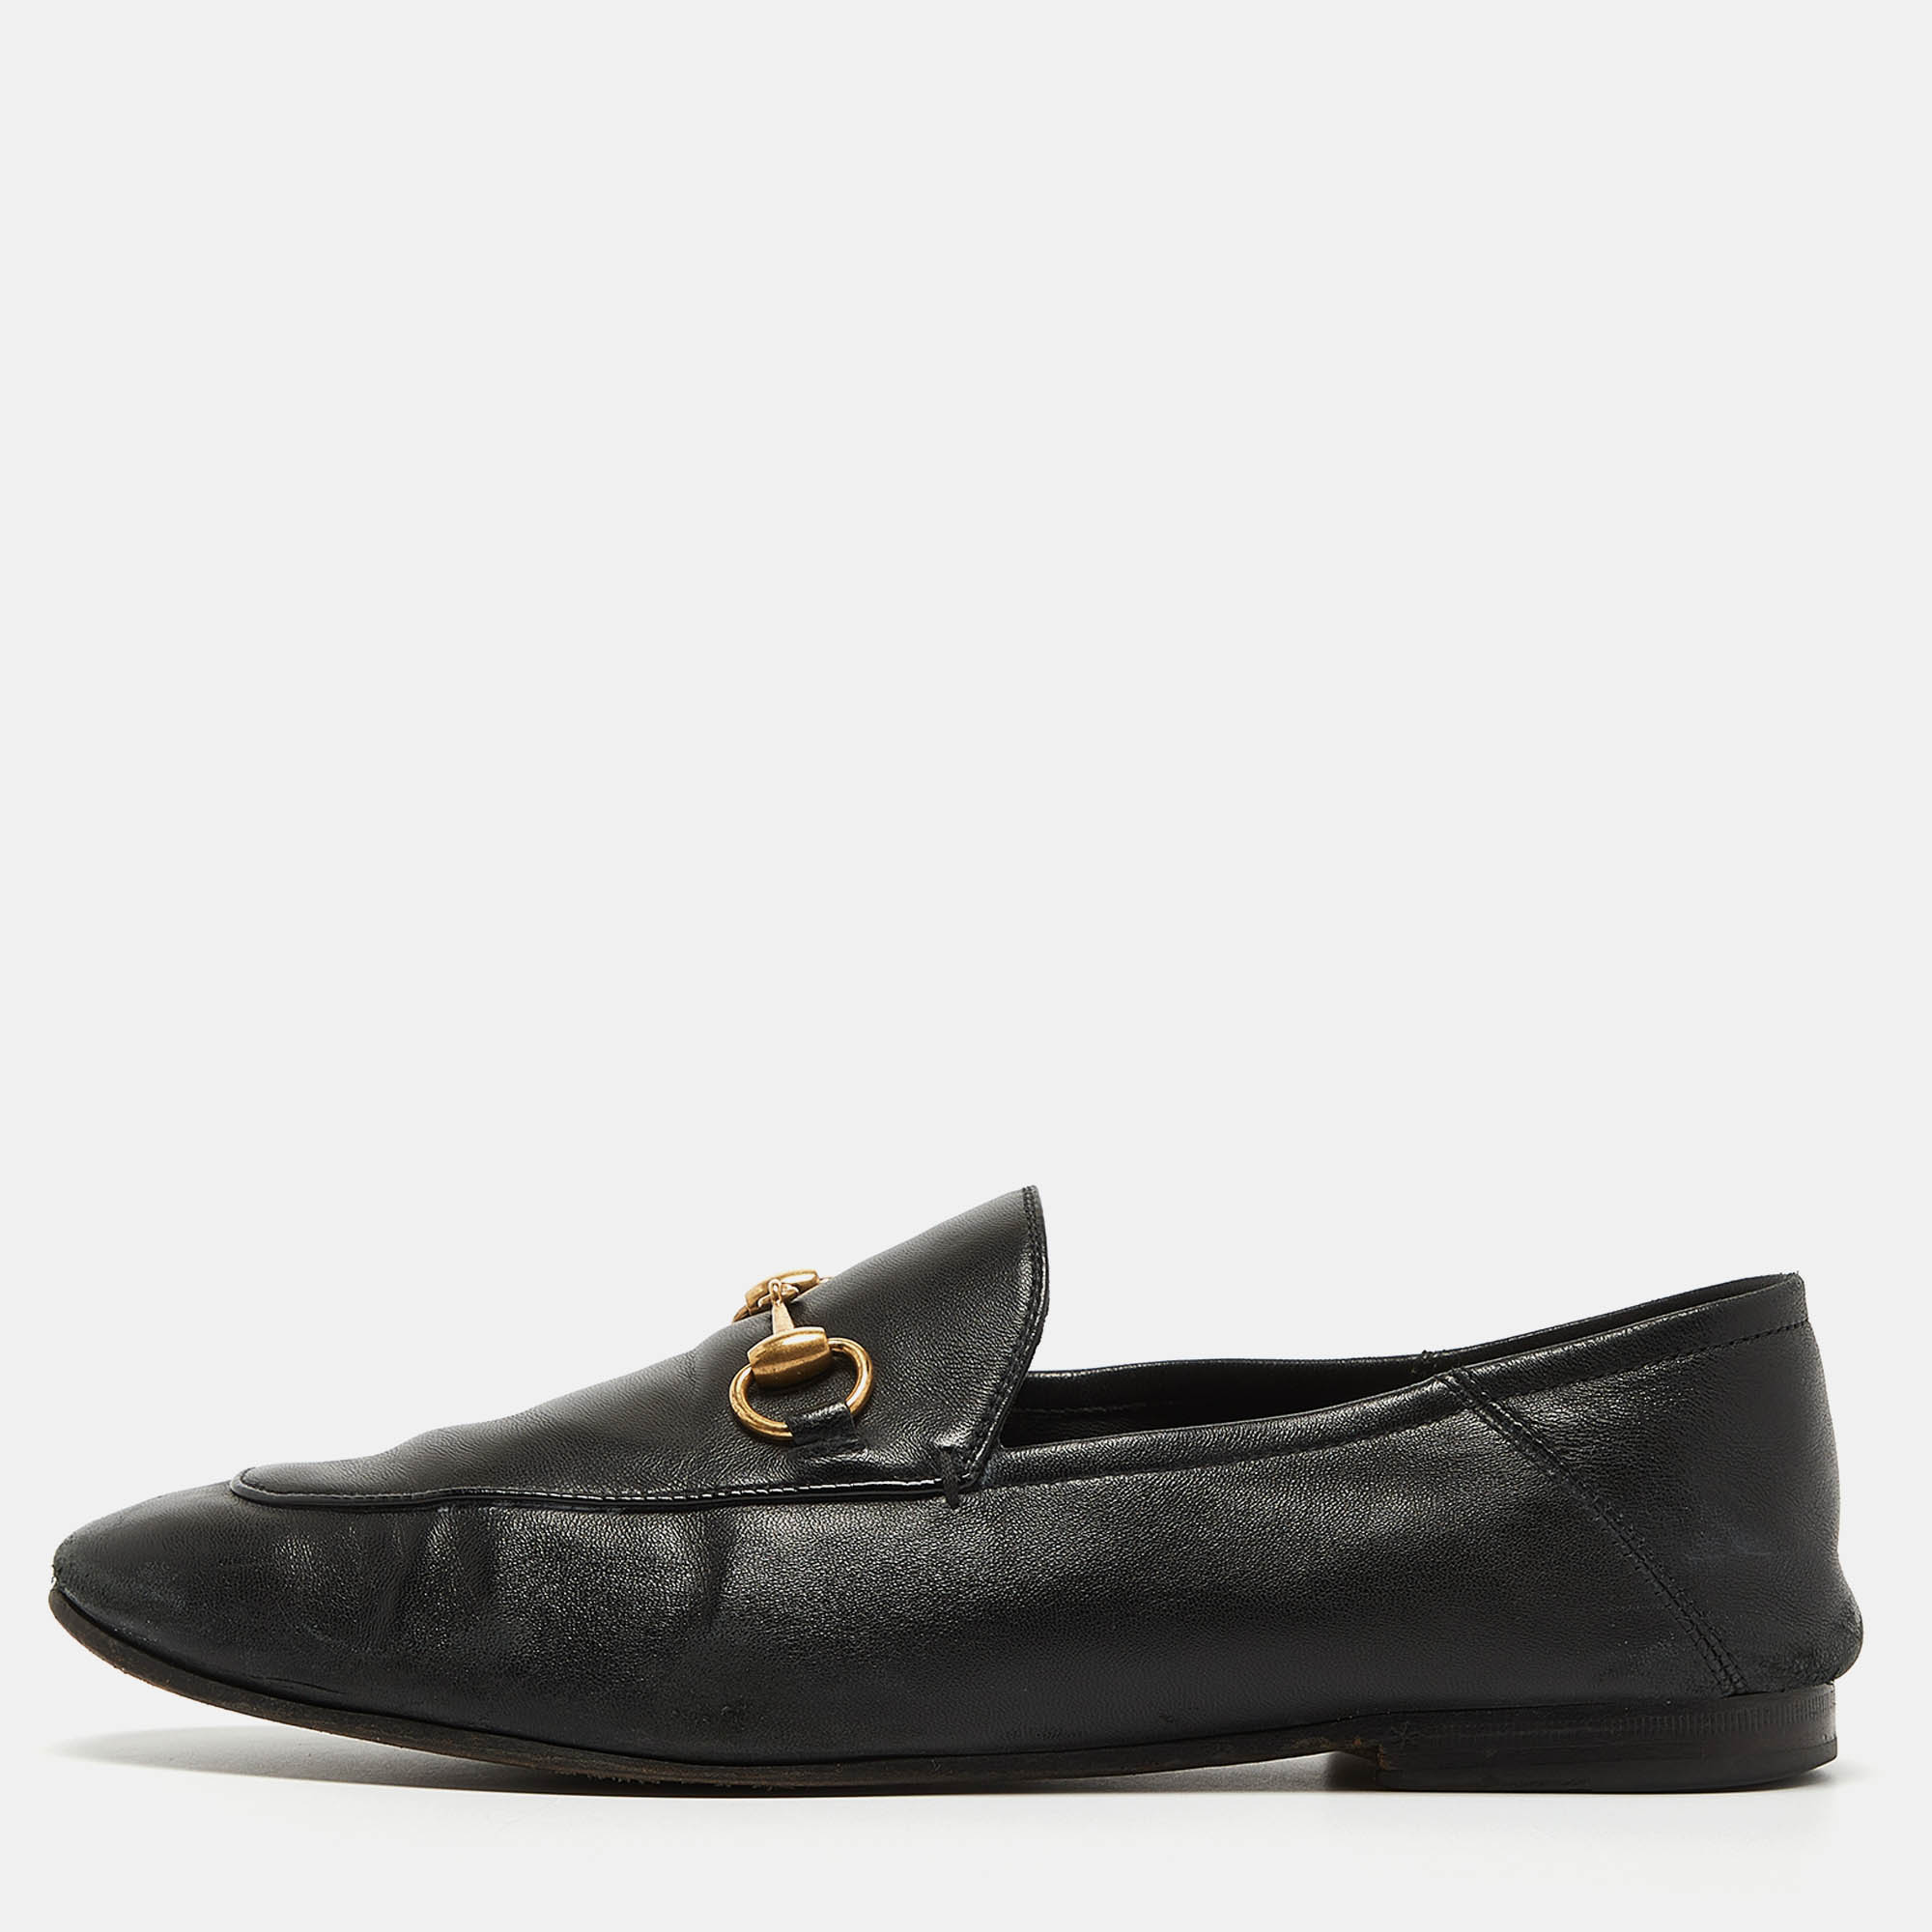 Pre-owned Gucci Jordaan Black Leather Slip On Loafers Size 42.5